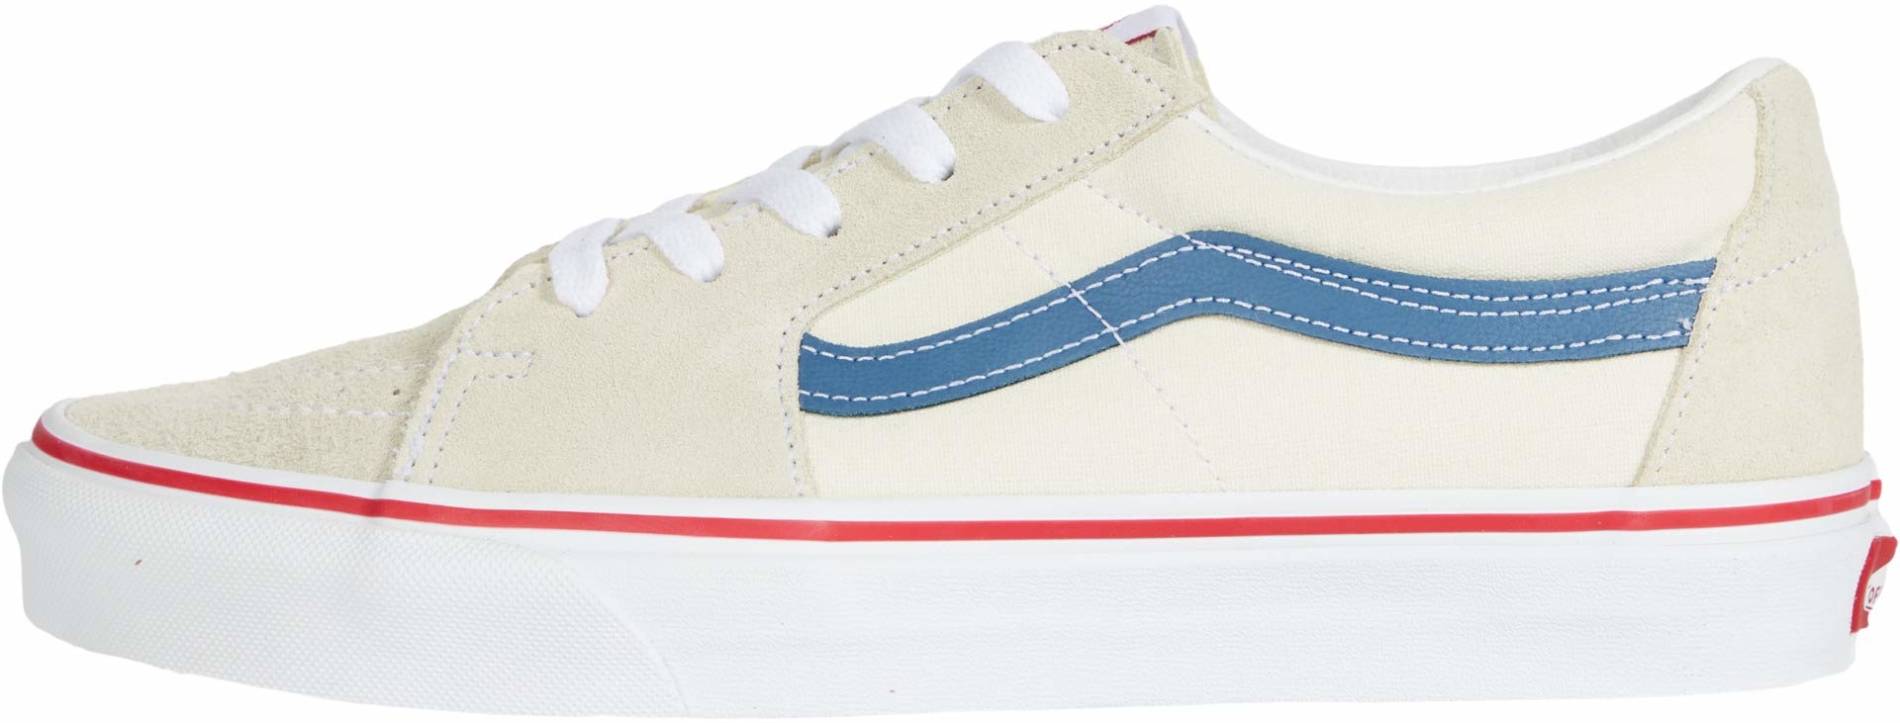 Egypten Daggry erfaring 20+ White Vans sneakers: Save up to 50% | RunRepeat